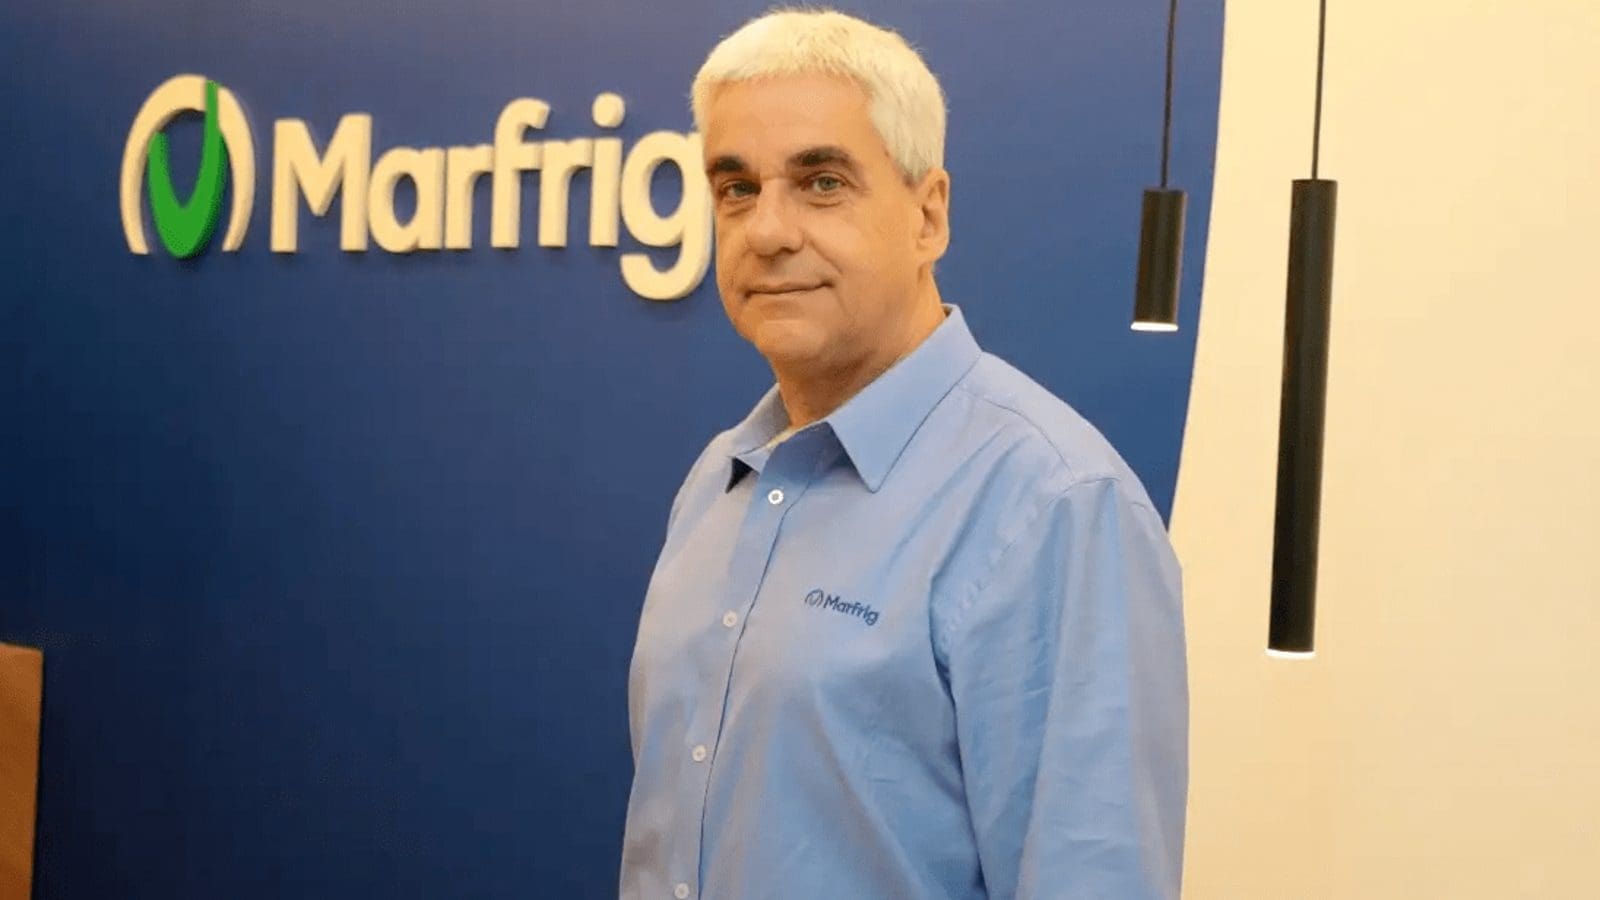 BRF names Miguel Gularte as CEO of meat processing unit amid concerns over the appointment